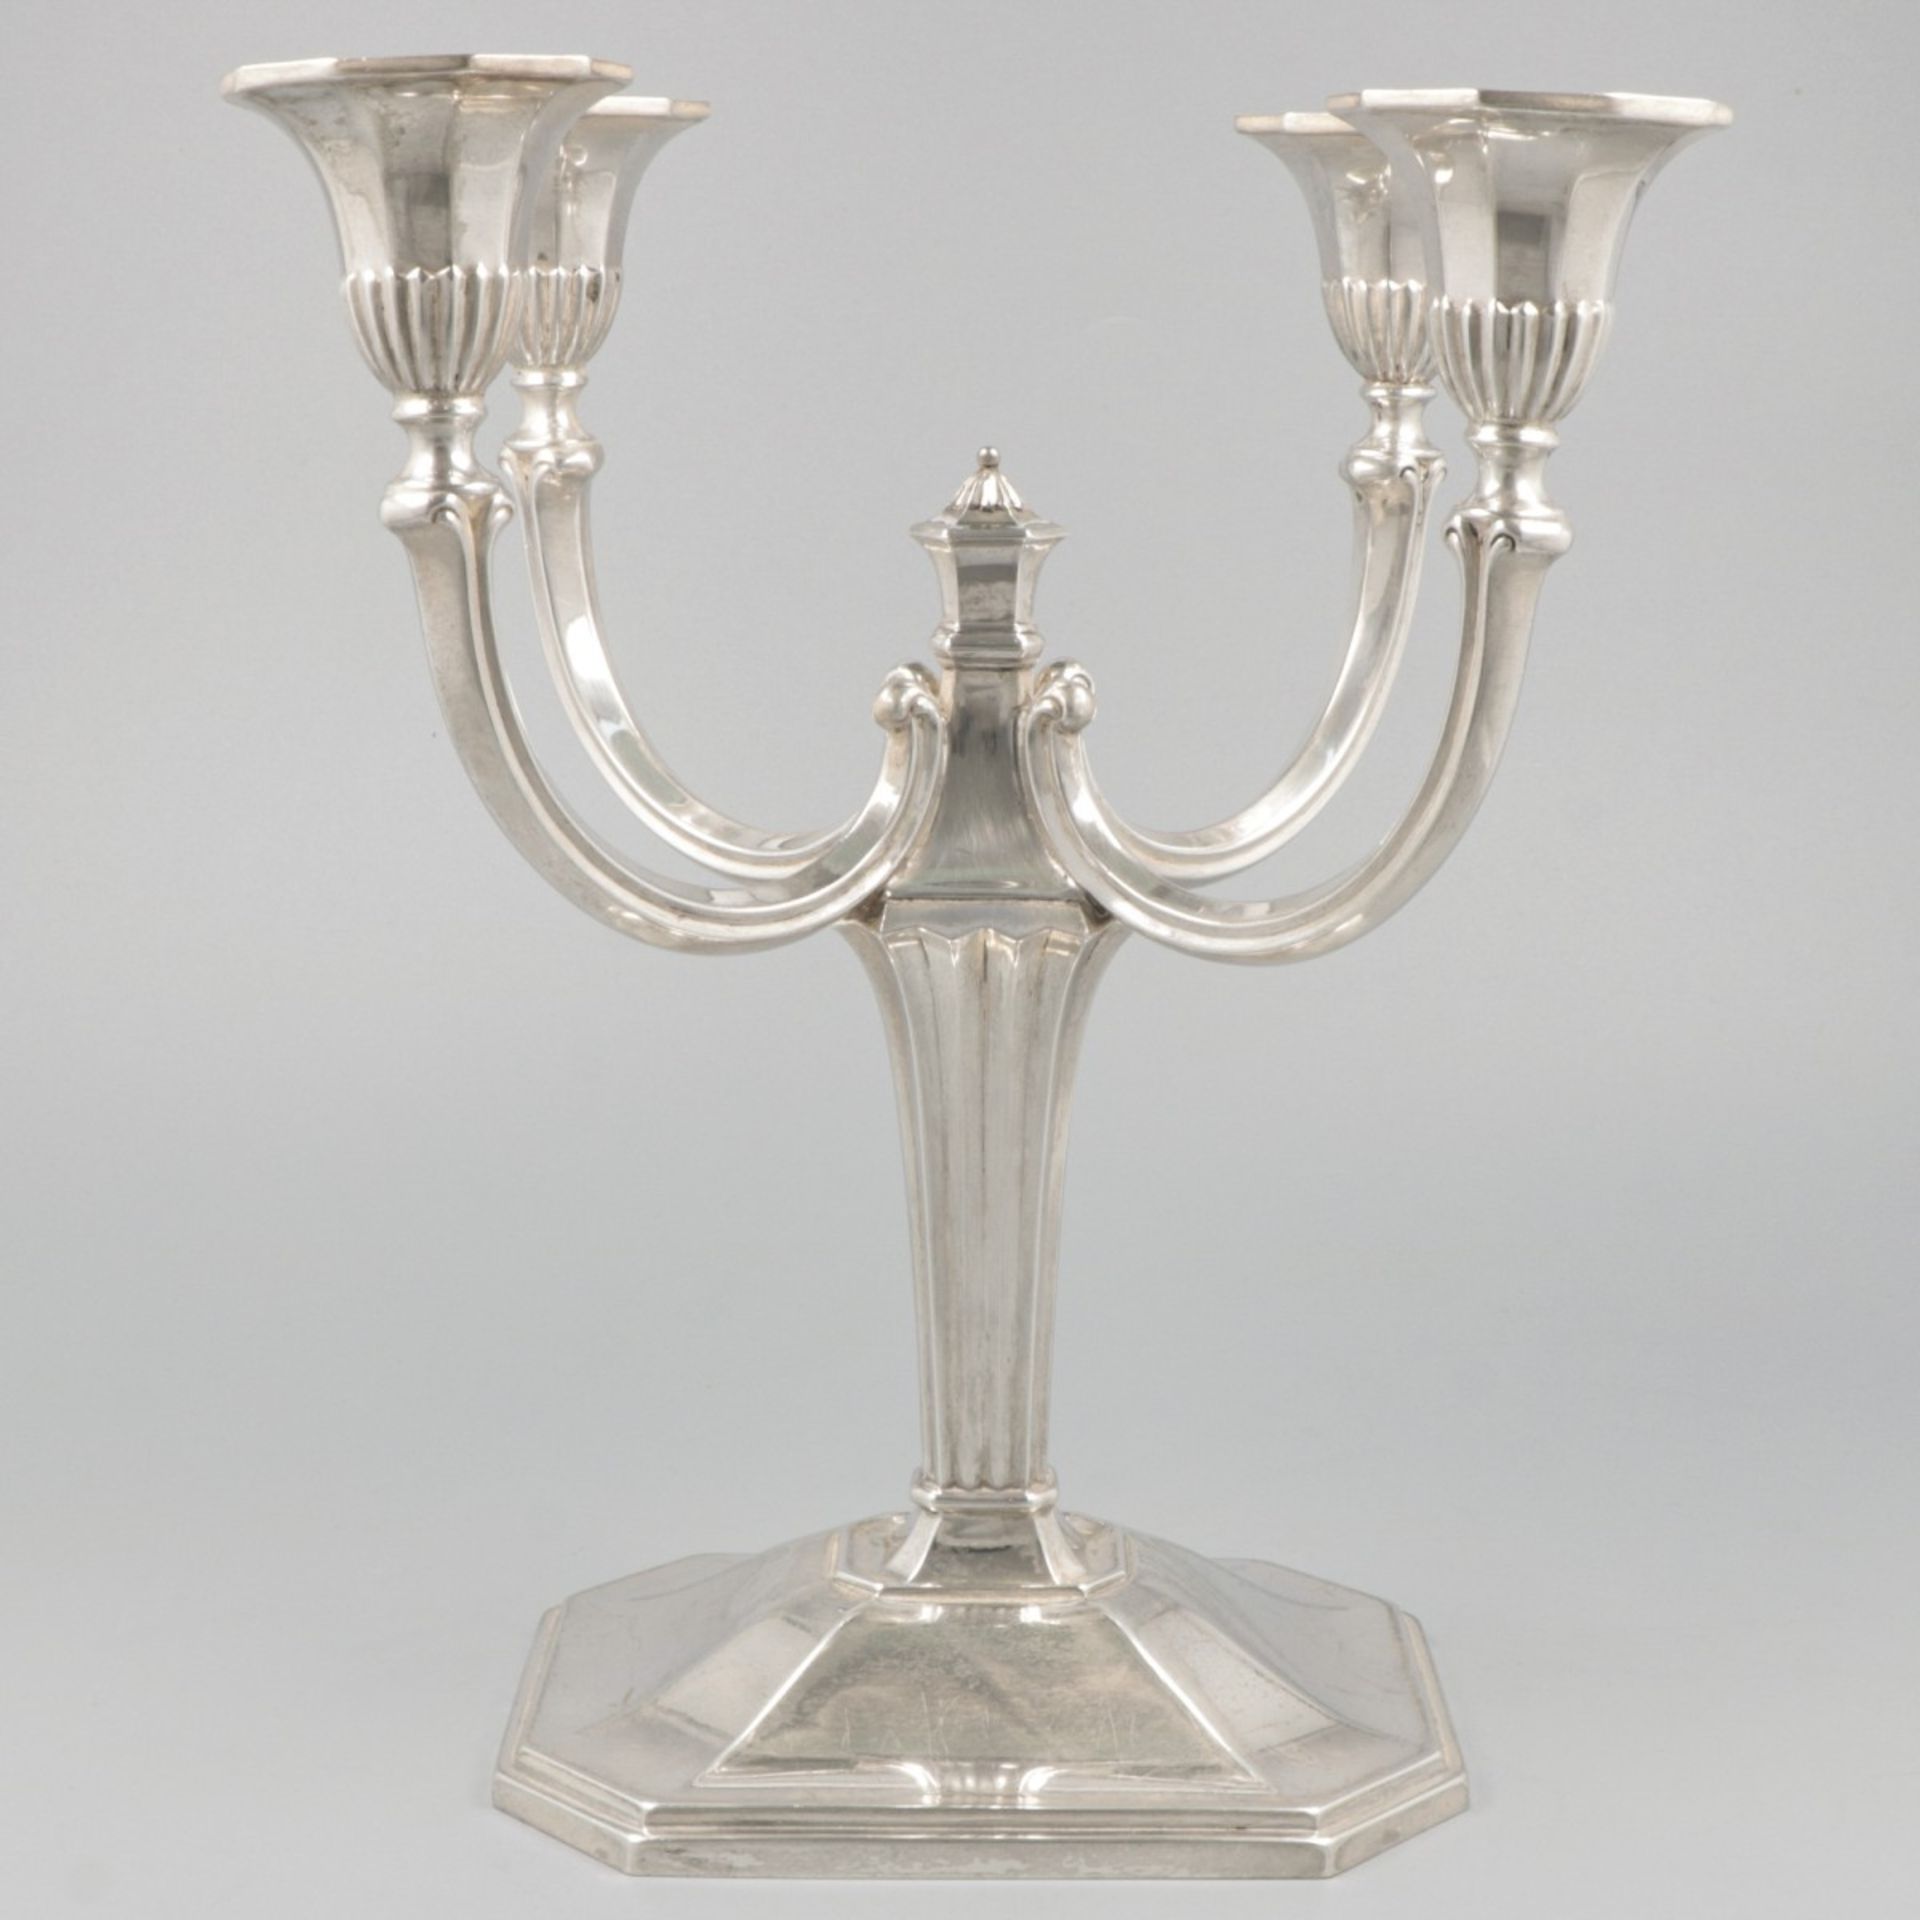 2-piece set of candlesticks silver. - Image 4 of 8